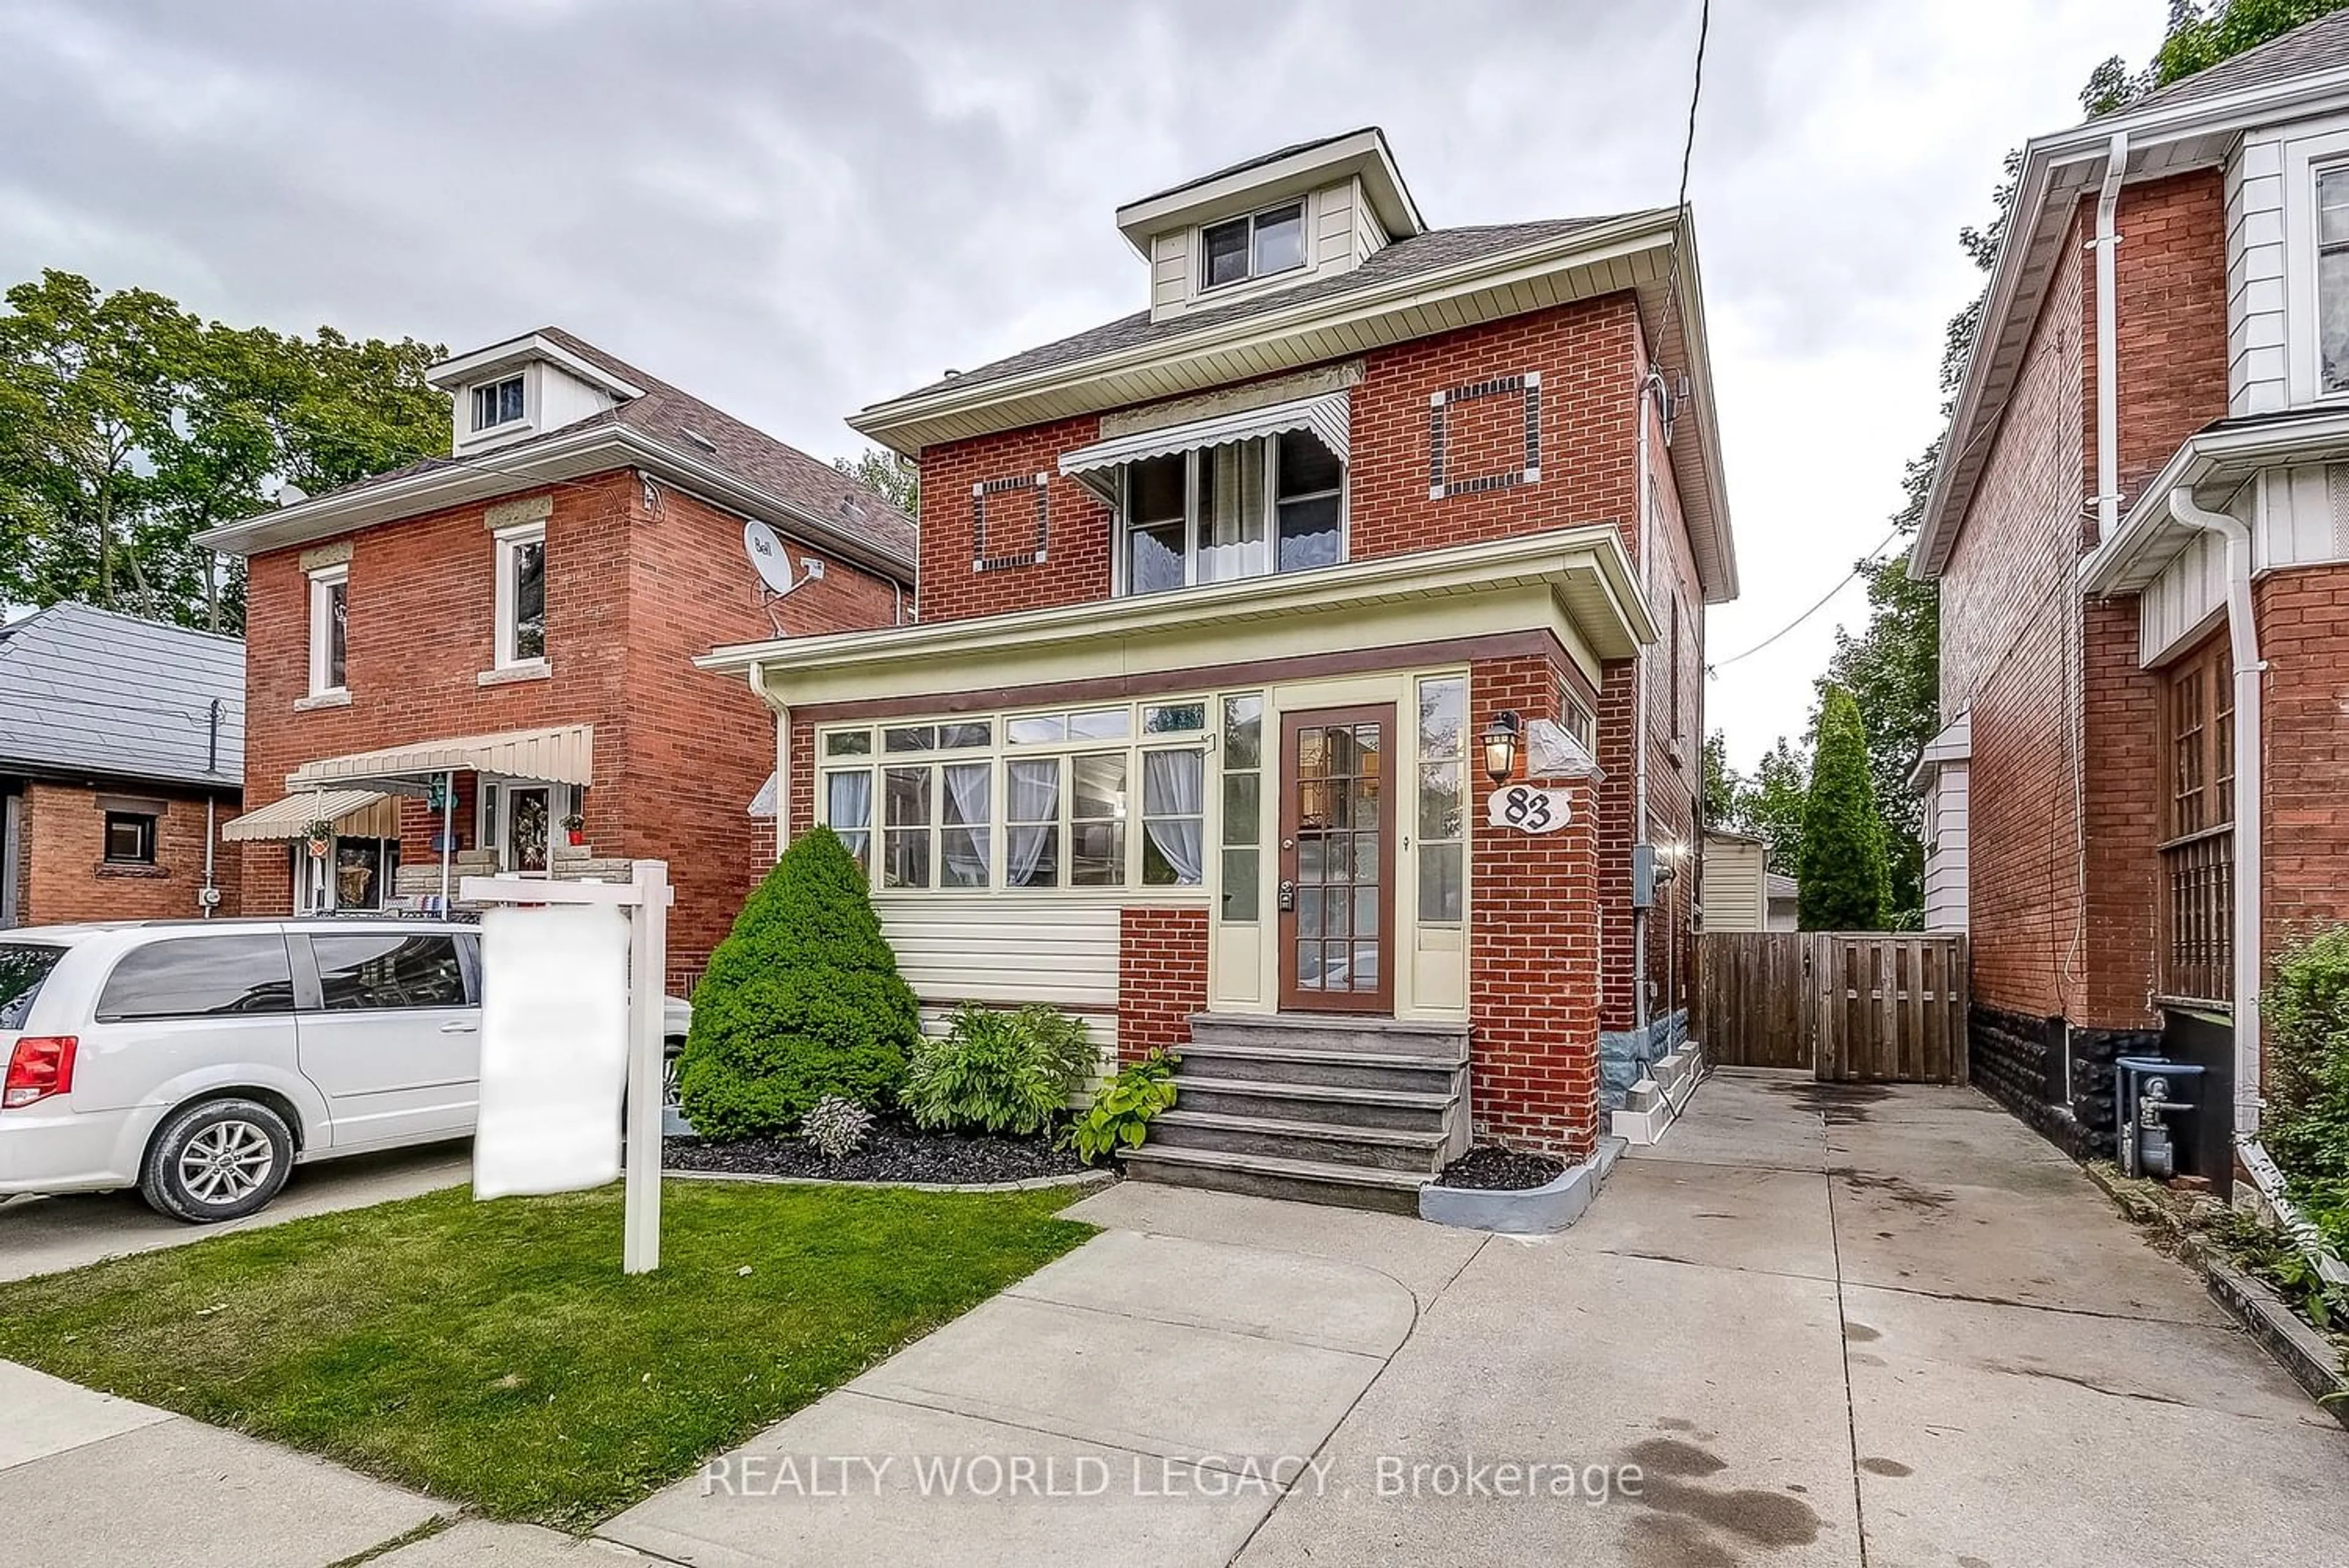 Home with brick exterior material for 83 Graham Ave, Hamilton Ontario L8K 2M2